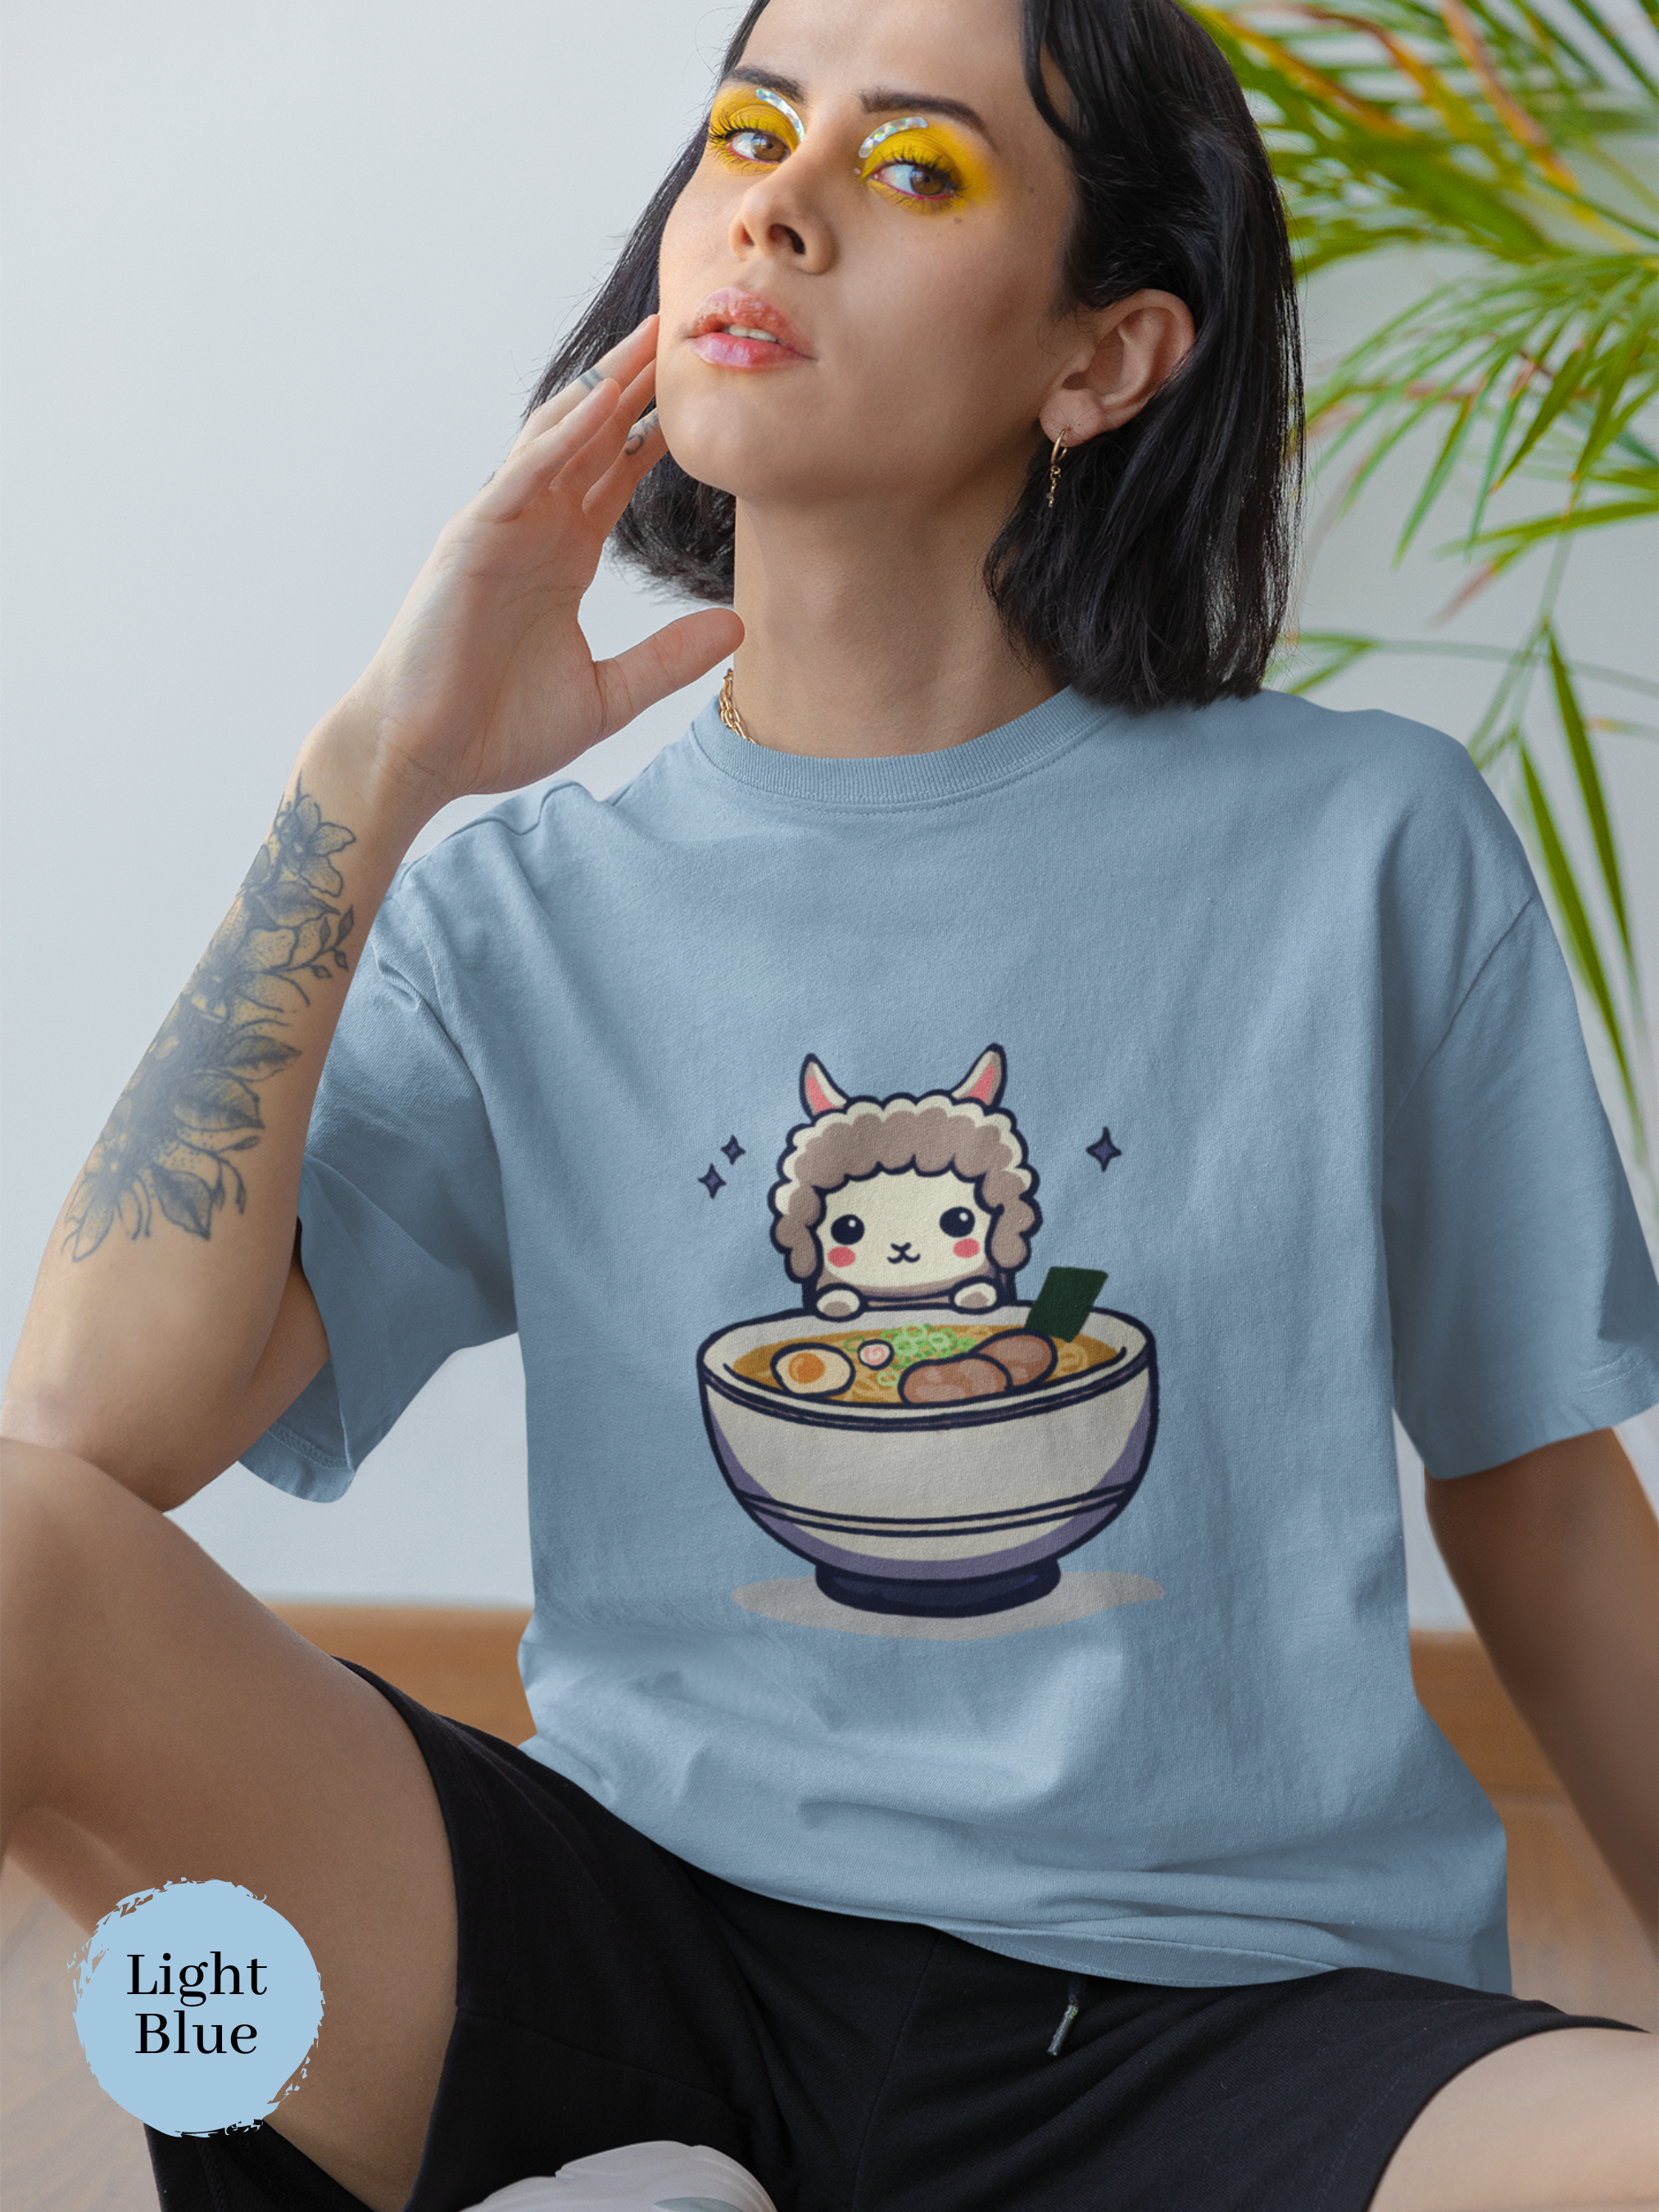 Ramen T-shirt: Japanese Foodie Shirt with Fun Ramen Art Featuring a Llama and Delicious Noodles